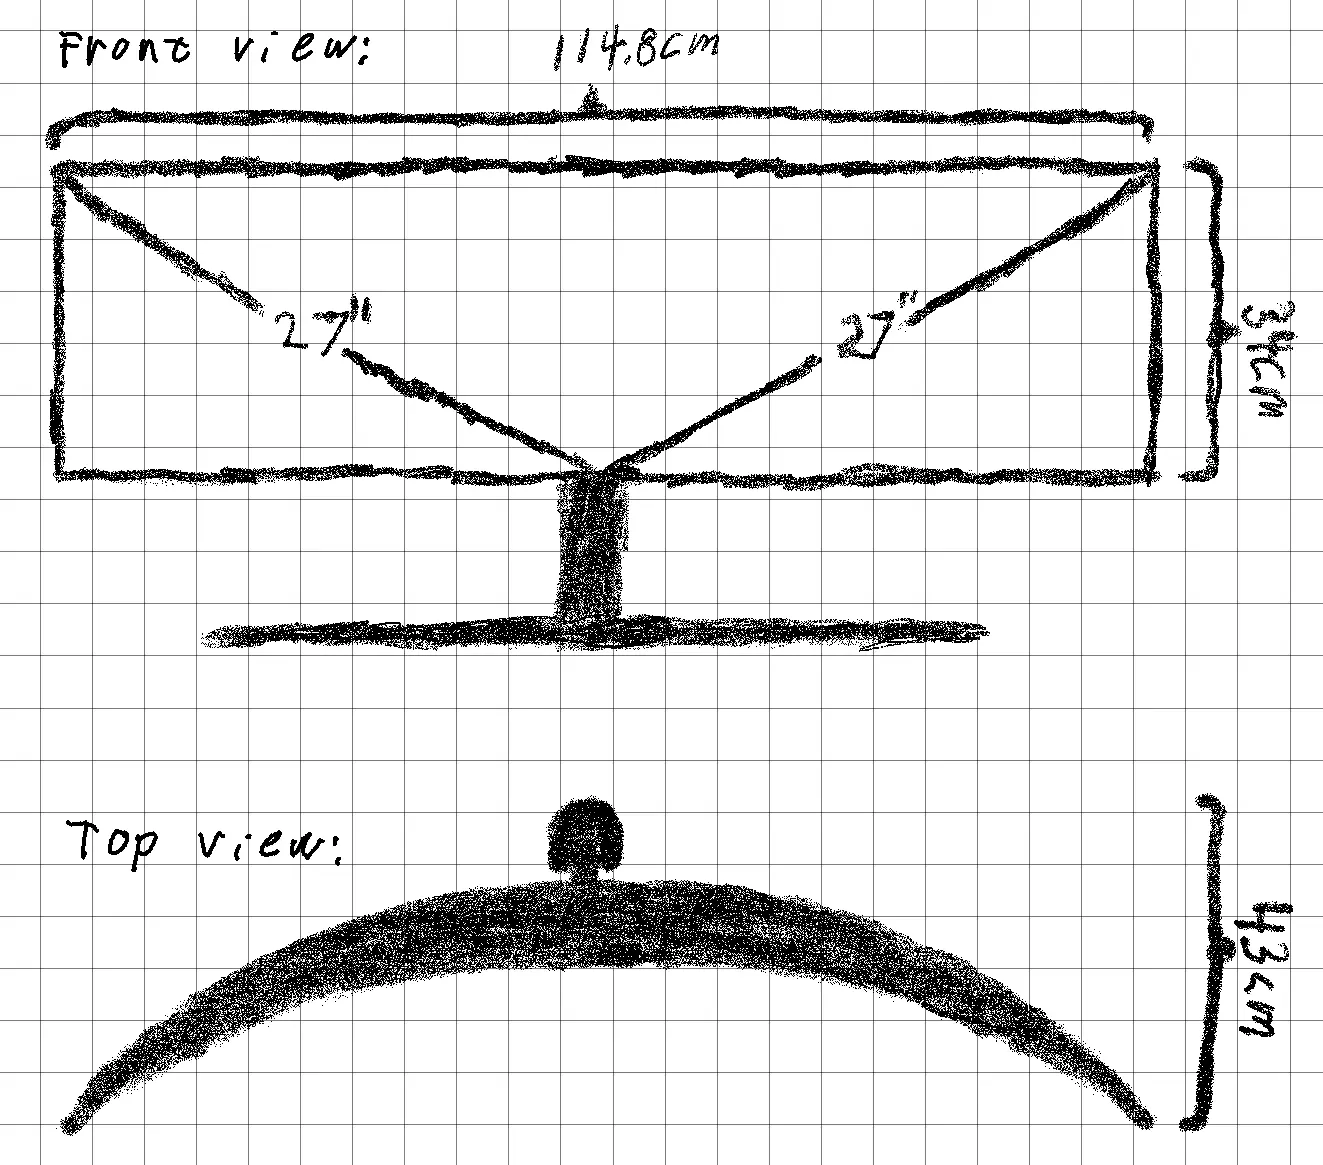 Drawn sketch of the monitor size